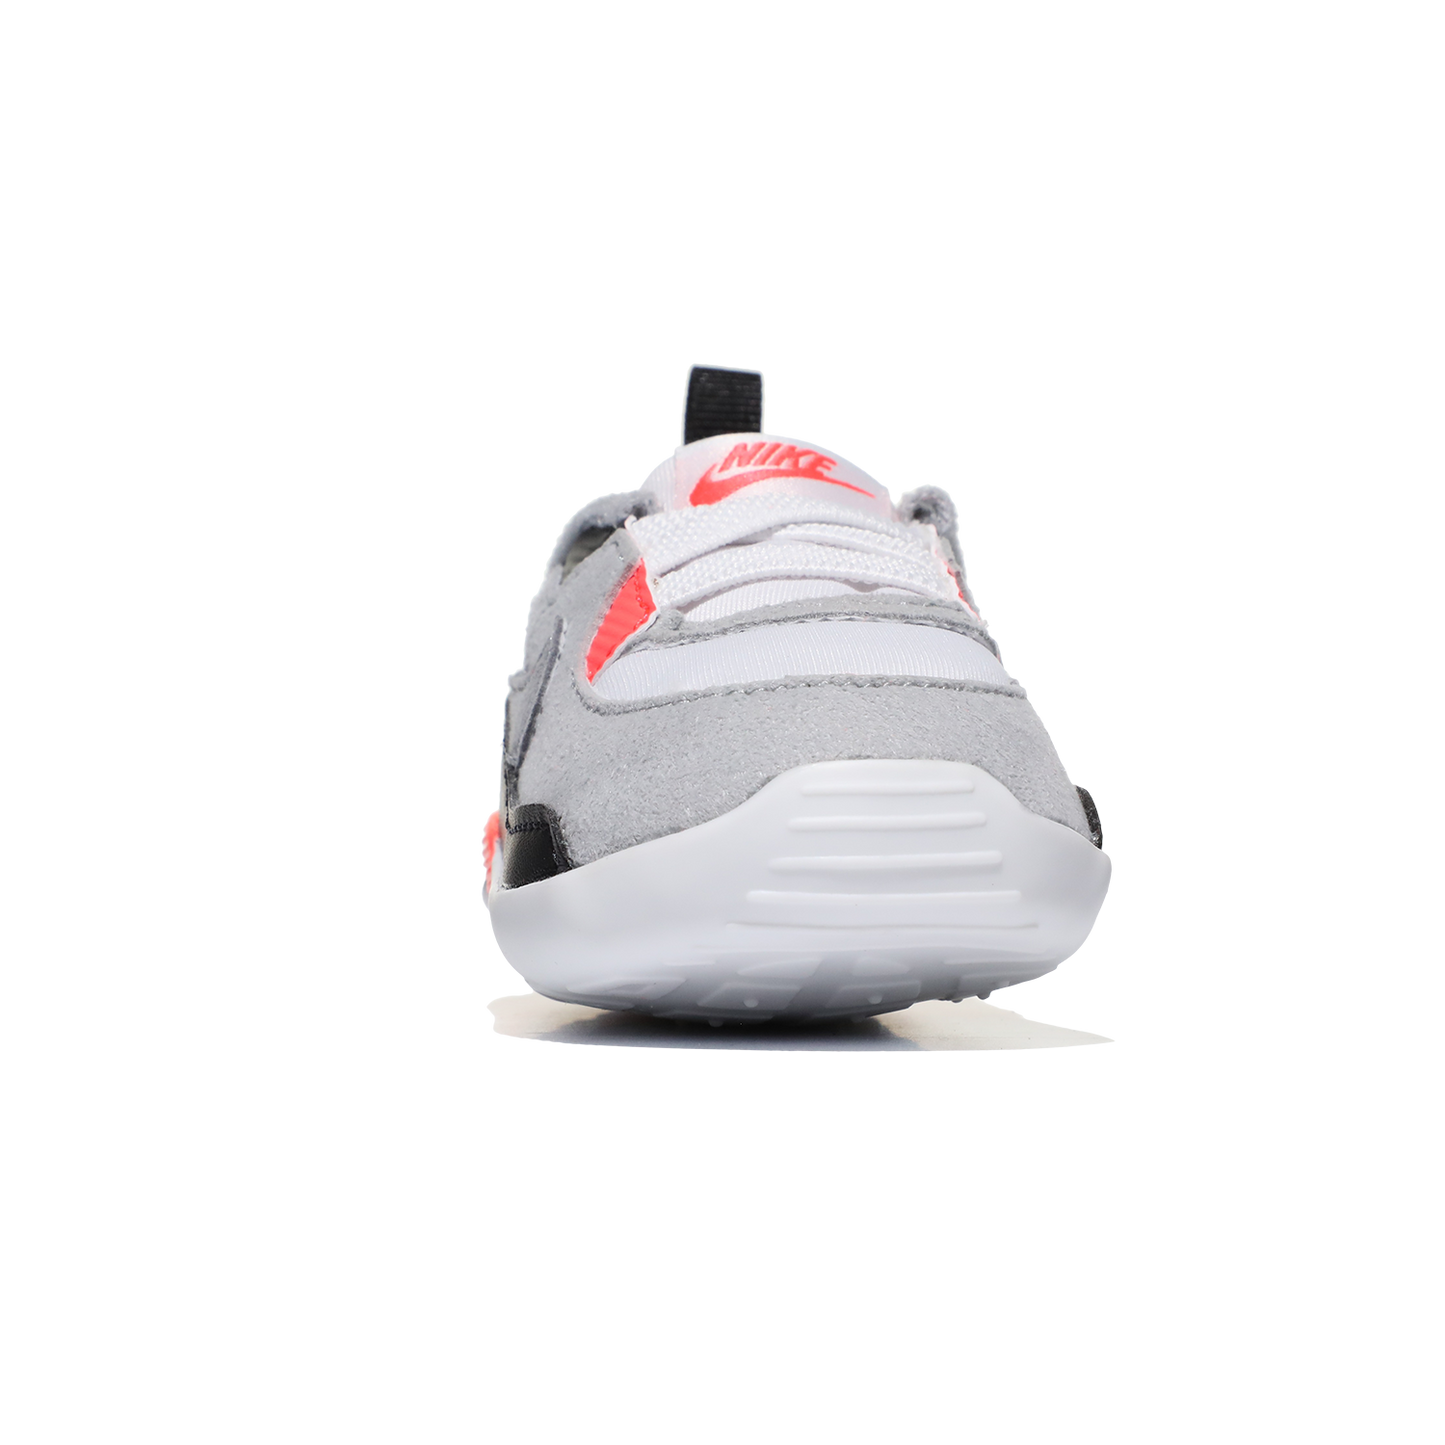 Image 4 of Air Max 90 (Infant/Toddler)